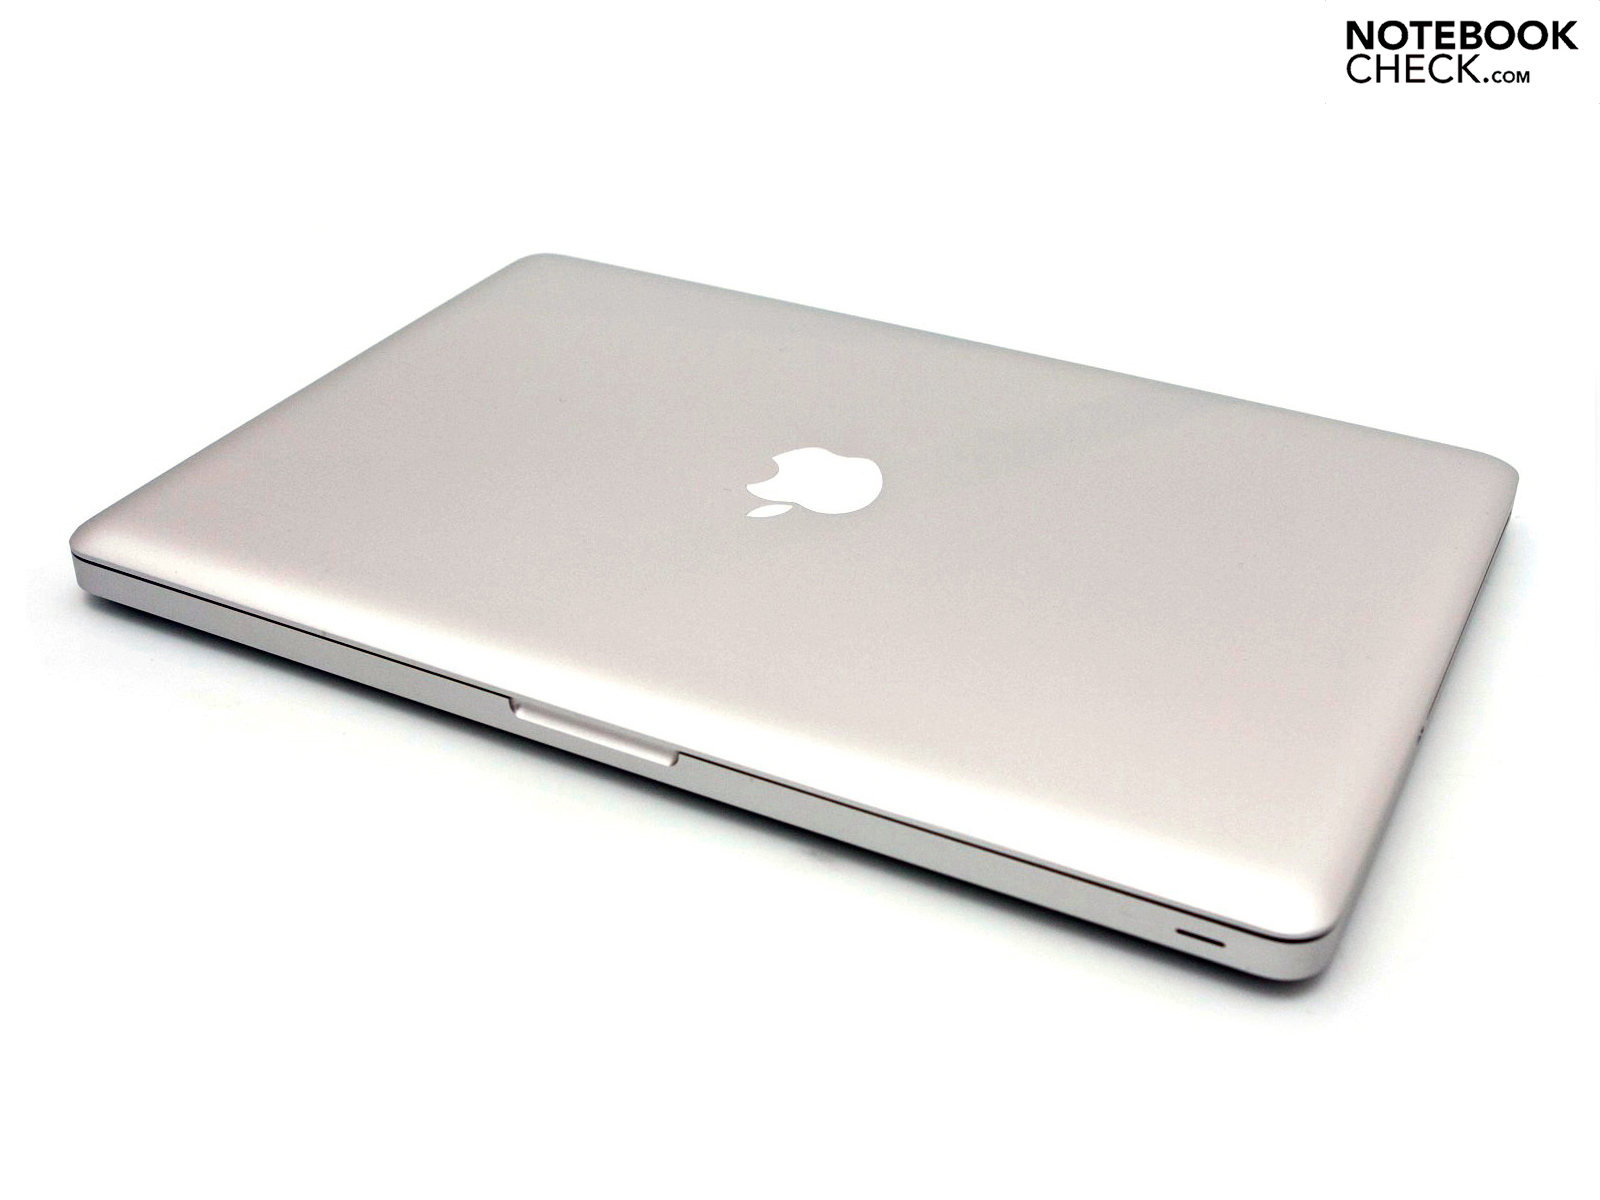 Review Apple MacBook Pro 15 Early 2011 (2.2 GHz quad-core